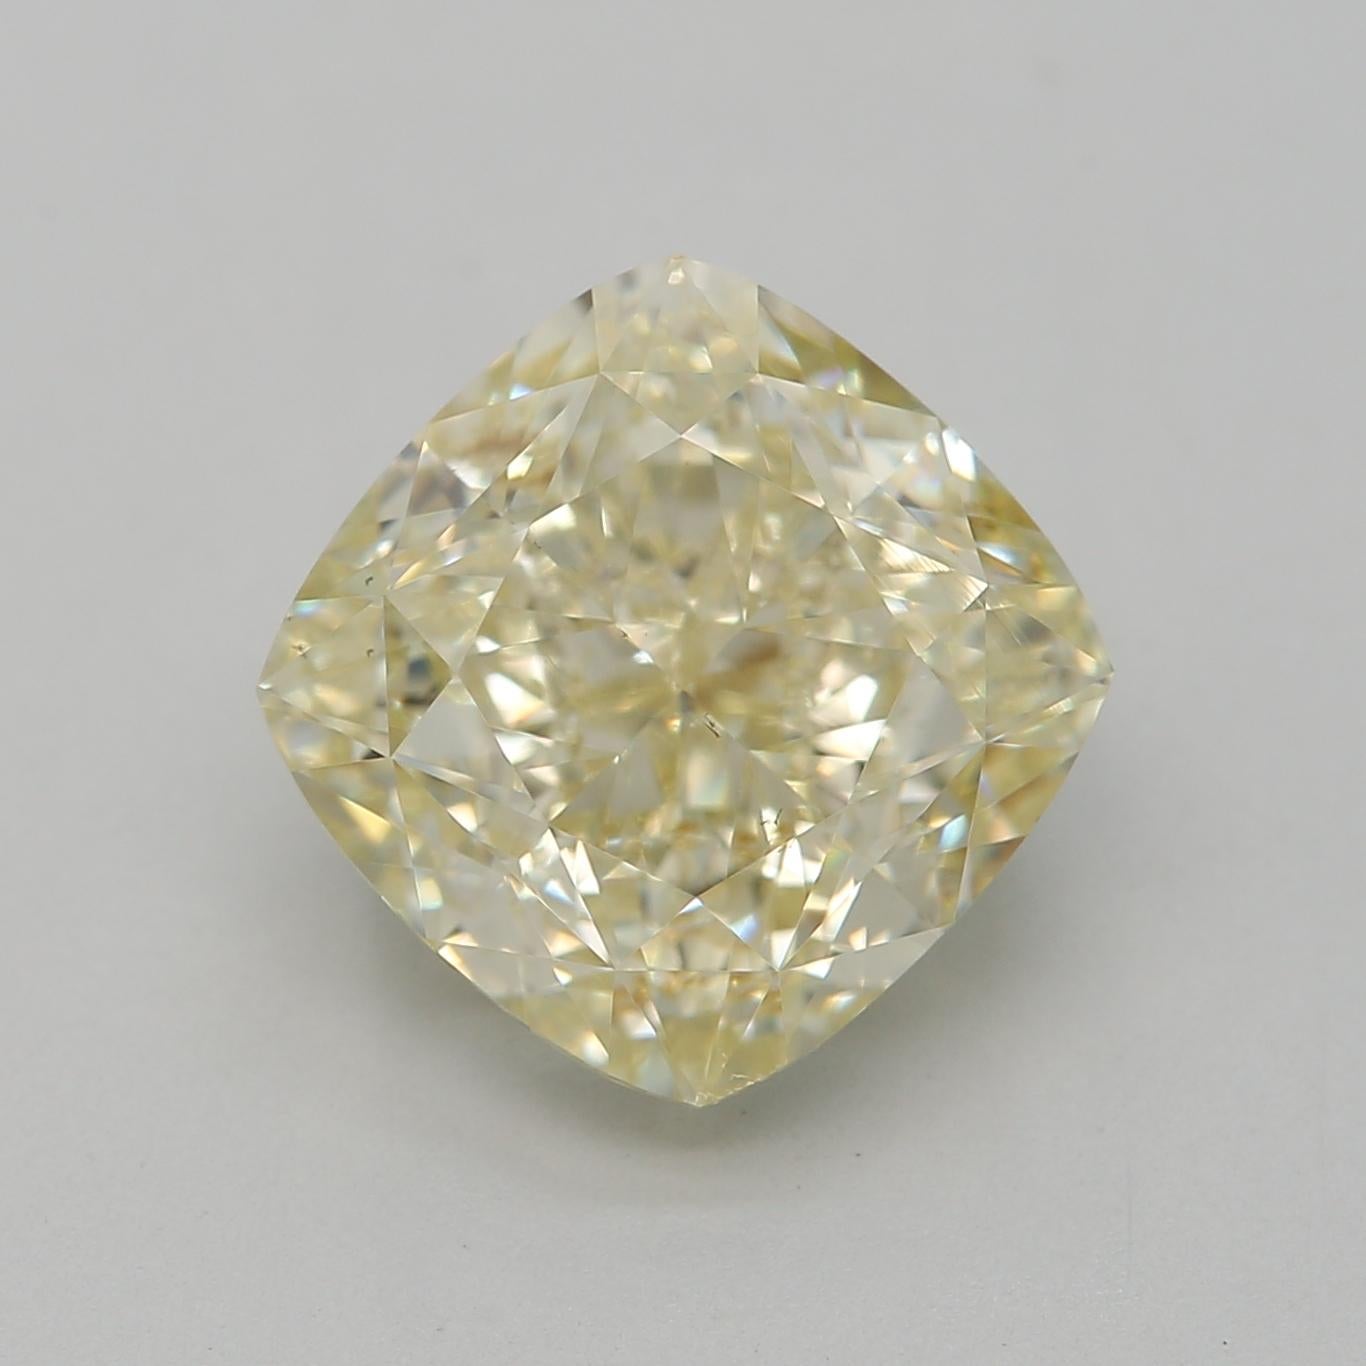 ***100% NATURAL FANCY COLOUR DIAMOND***

✪ Diamond Details ✪

➛ Shape: Cushion
➛ Colour Grade: Fancy Light Brownish Greenish Yellow
➛ Carat: 2.55
➛ Clarity: VS2
➛ GIA Certified 

^FEATURES OF THE DIAMOND^

This cushion cut diamond is a square or